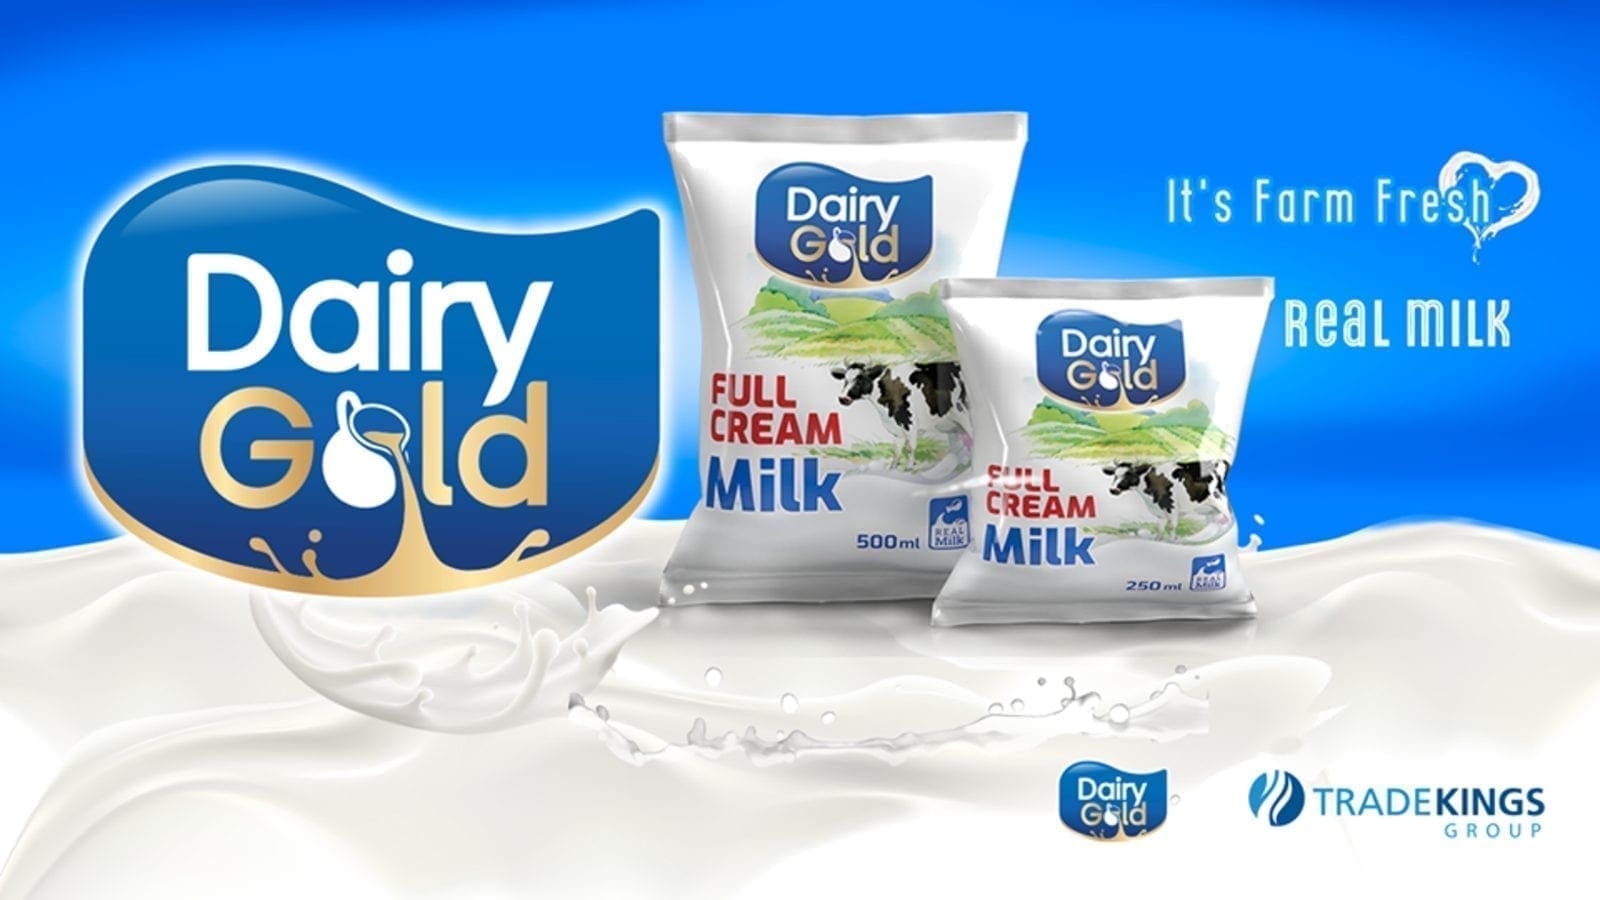 Trade Kings commissions new milk processing facility, expands dairy portfolio with launch of Dairy Gold fresh milk